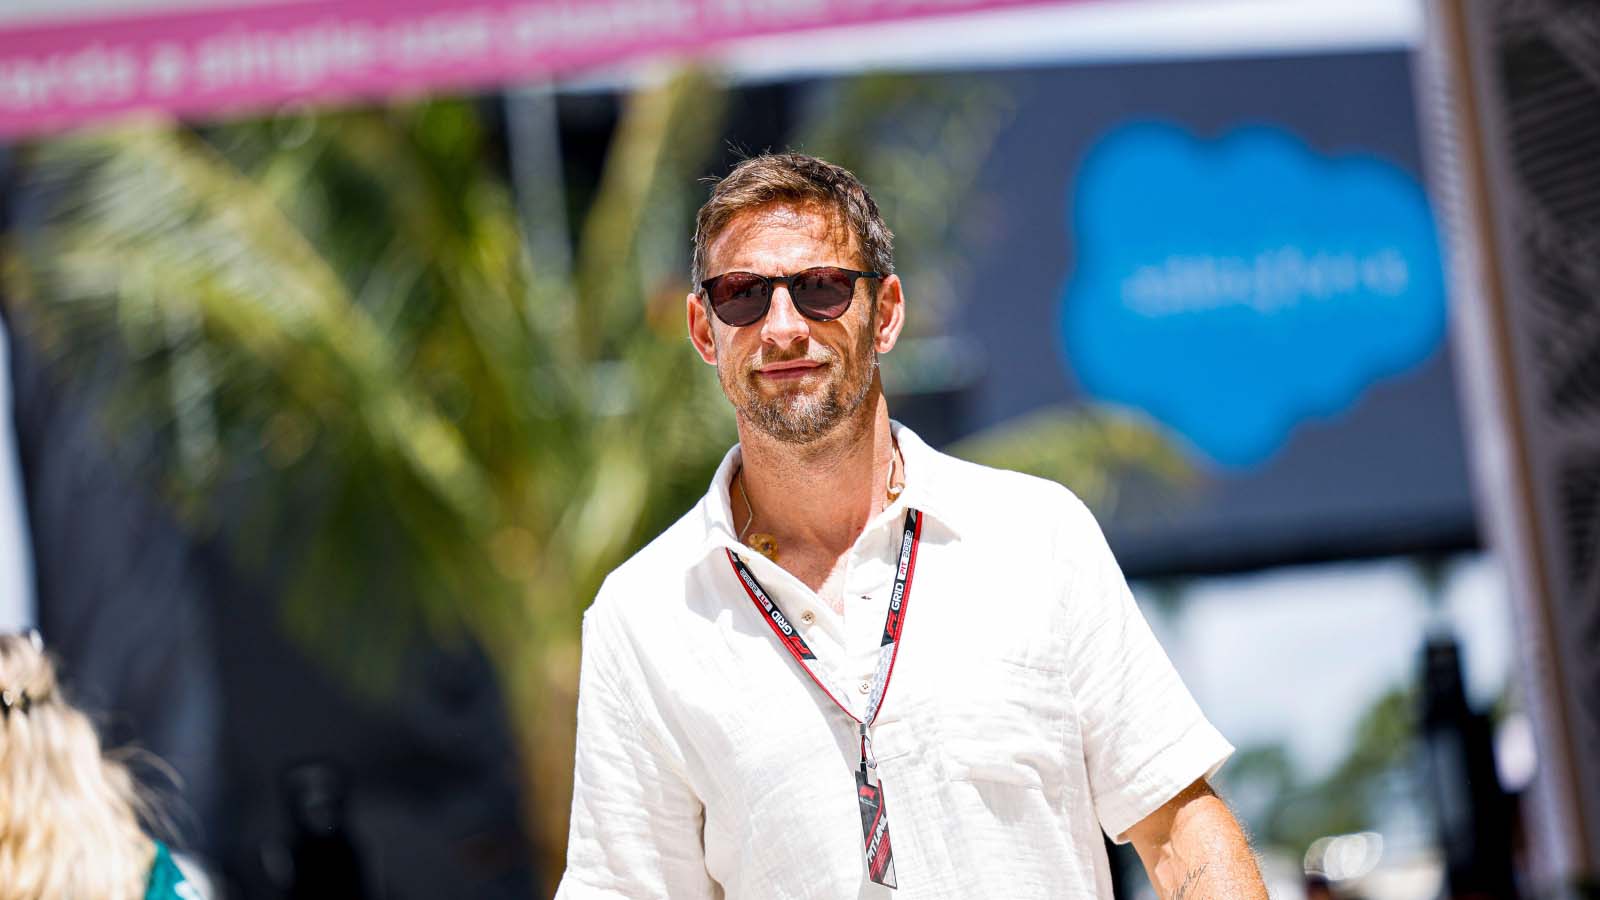 Jenson Button in the F1 paddock. Miami May 2022.